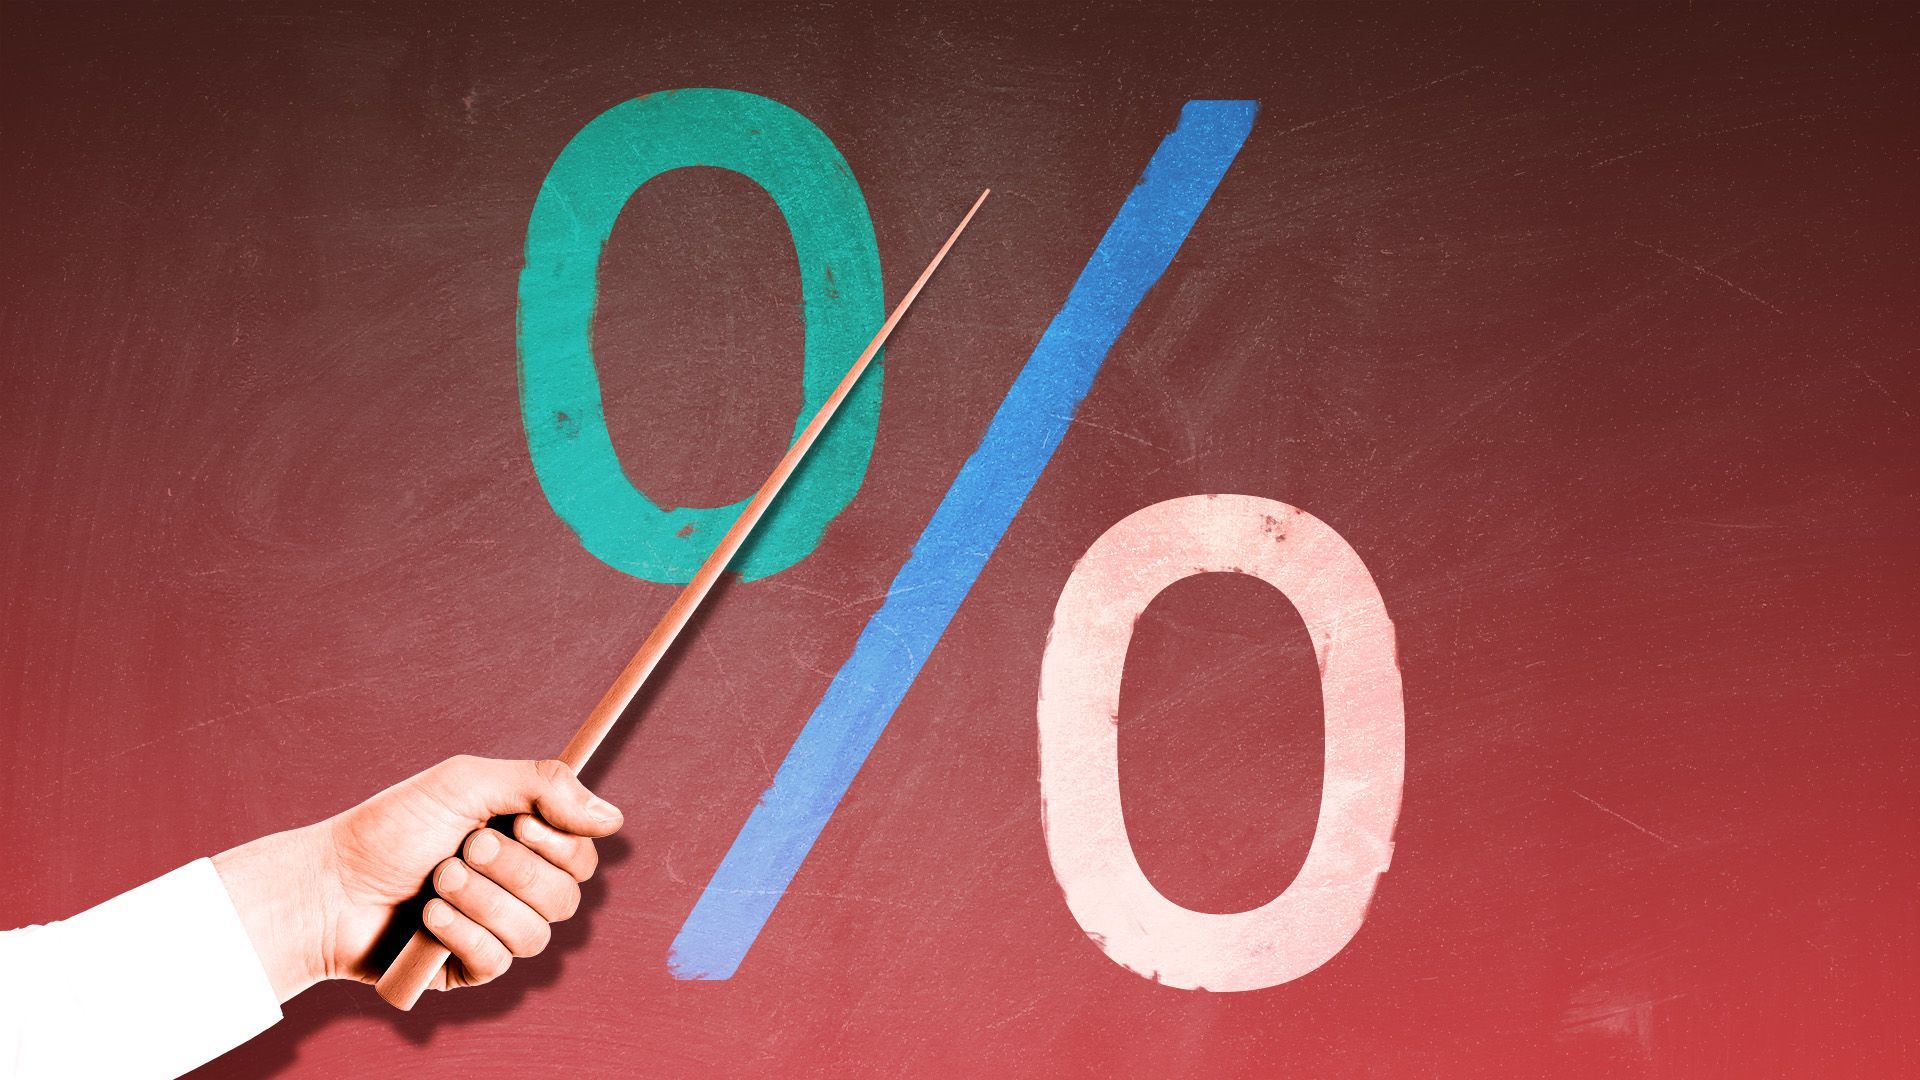 Illustration of a hand pointing to a percent sign on a chalkboard